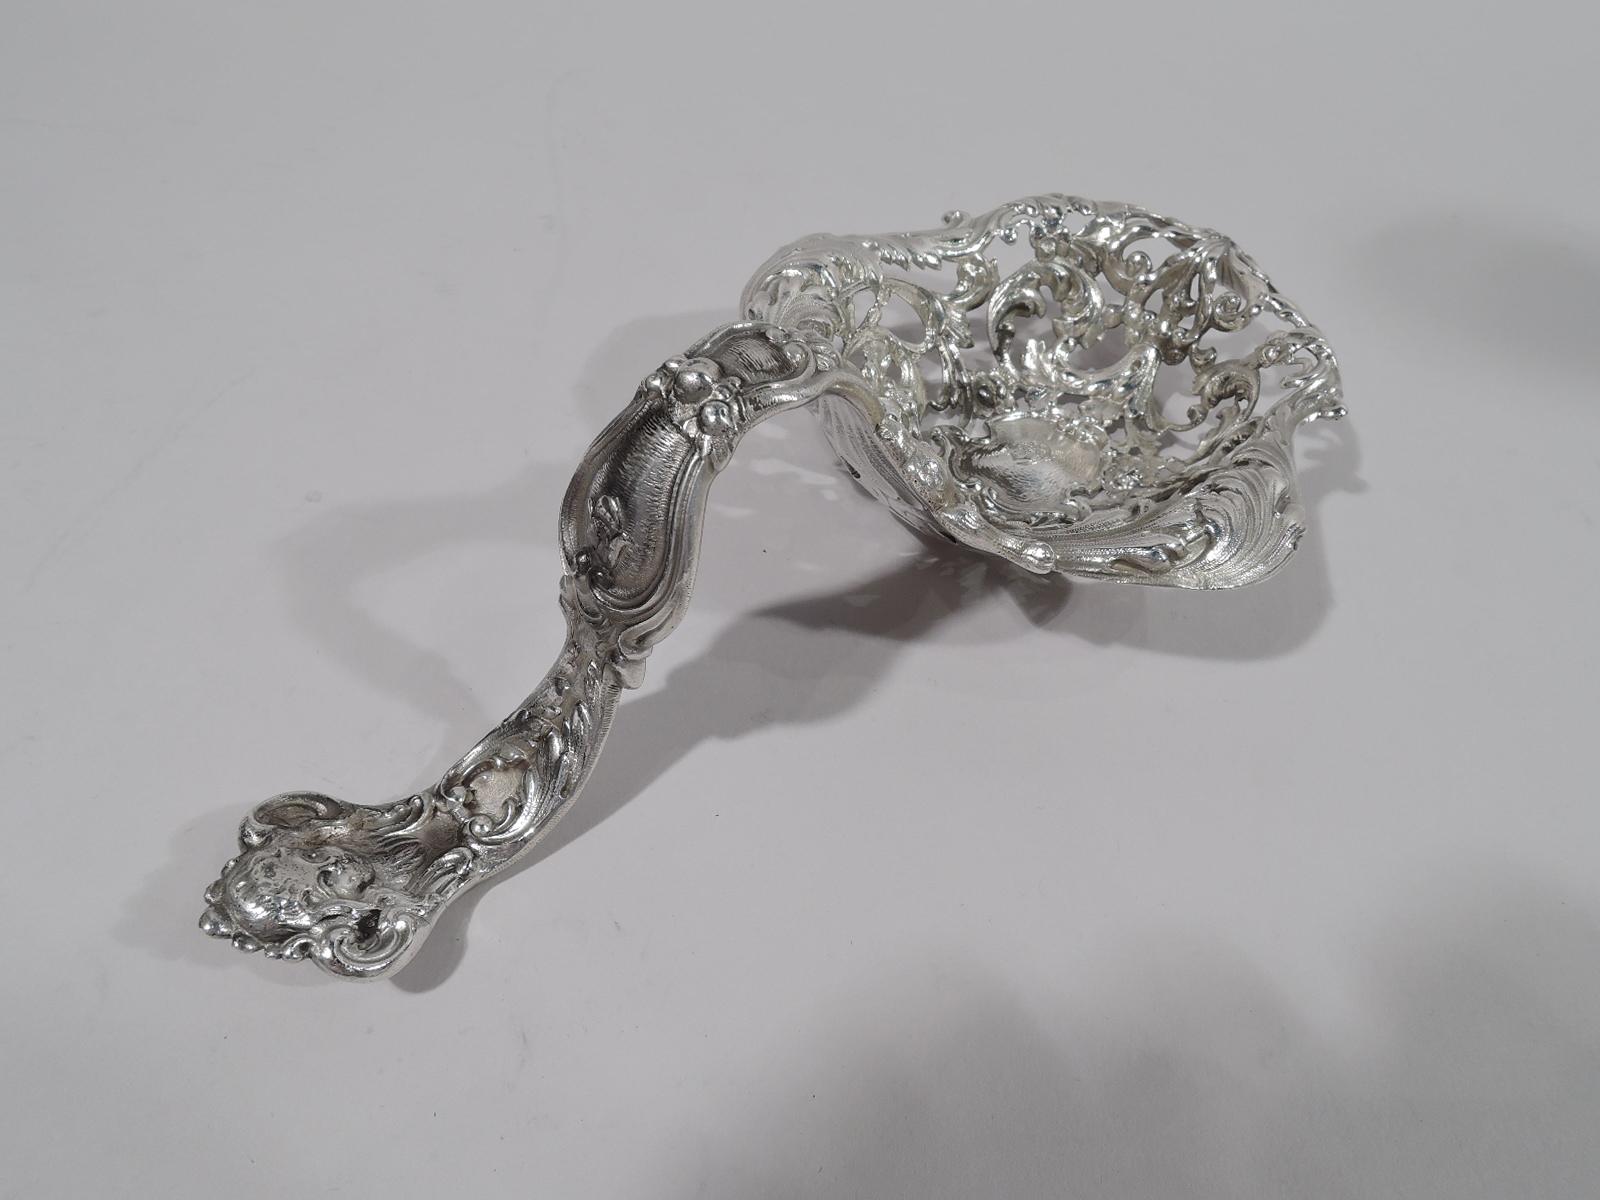 Art Nouveau Rococo sterling silver bonbon scoop. Made by Gorham in Providence in 1899. Deep and shaped bowl with turned-down rim, and pierced scrolls, flowers, and angel heads. Central strapwork cartouche engraved with monogram. Wavy baluster handle